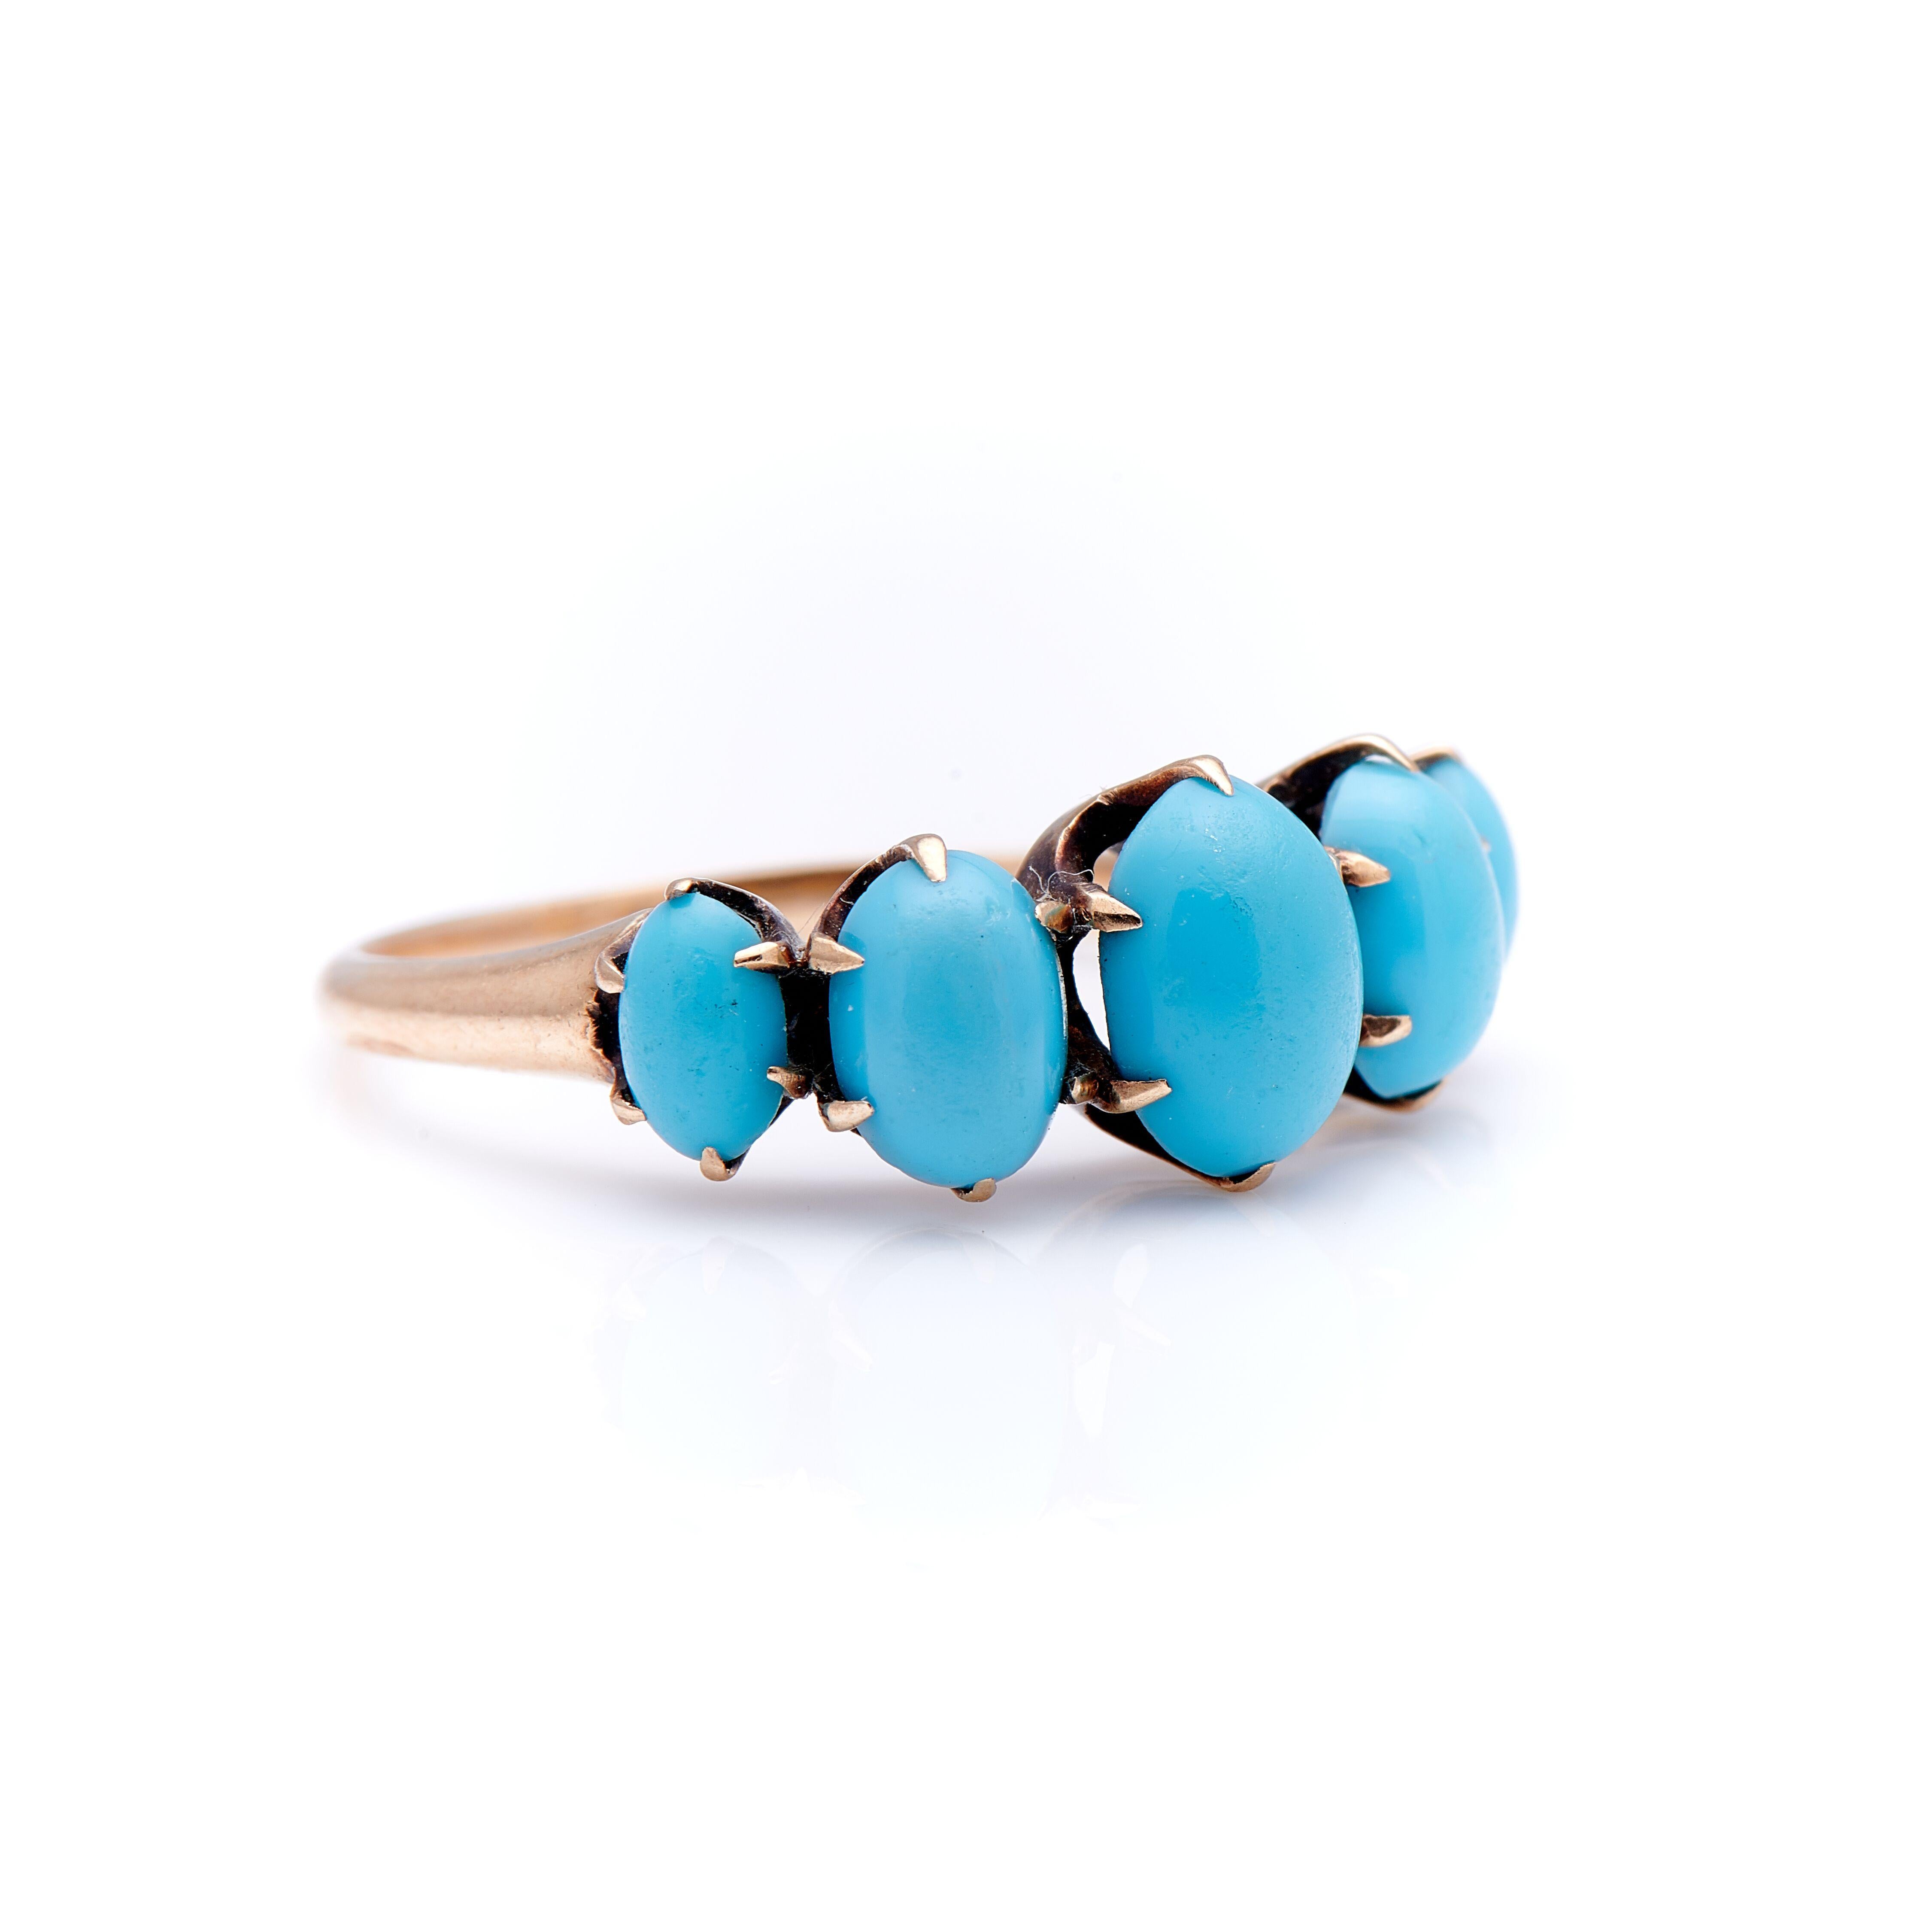 Victorian, turquoise five stone ring, circa 1890. Set with five beautiful robin-egg hue cabochon turquoise stones in a simple but beautifully executed yellow gold setting. Each piece of natural turquoise is well matched and secured by curving carved